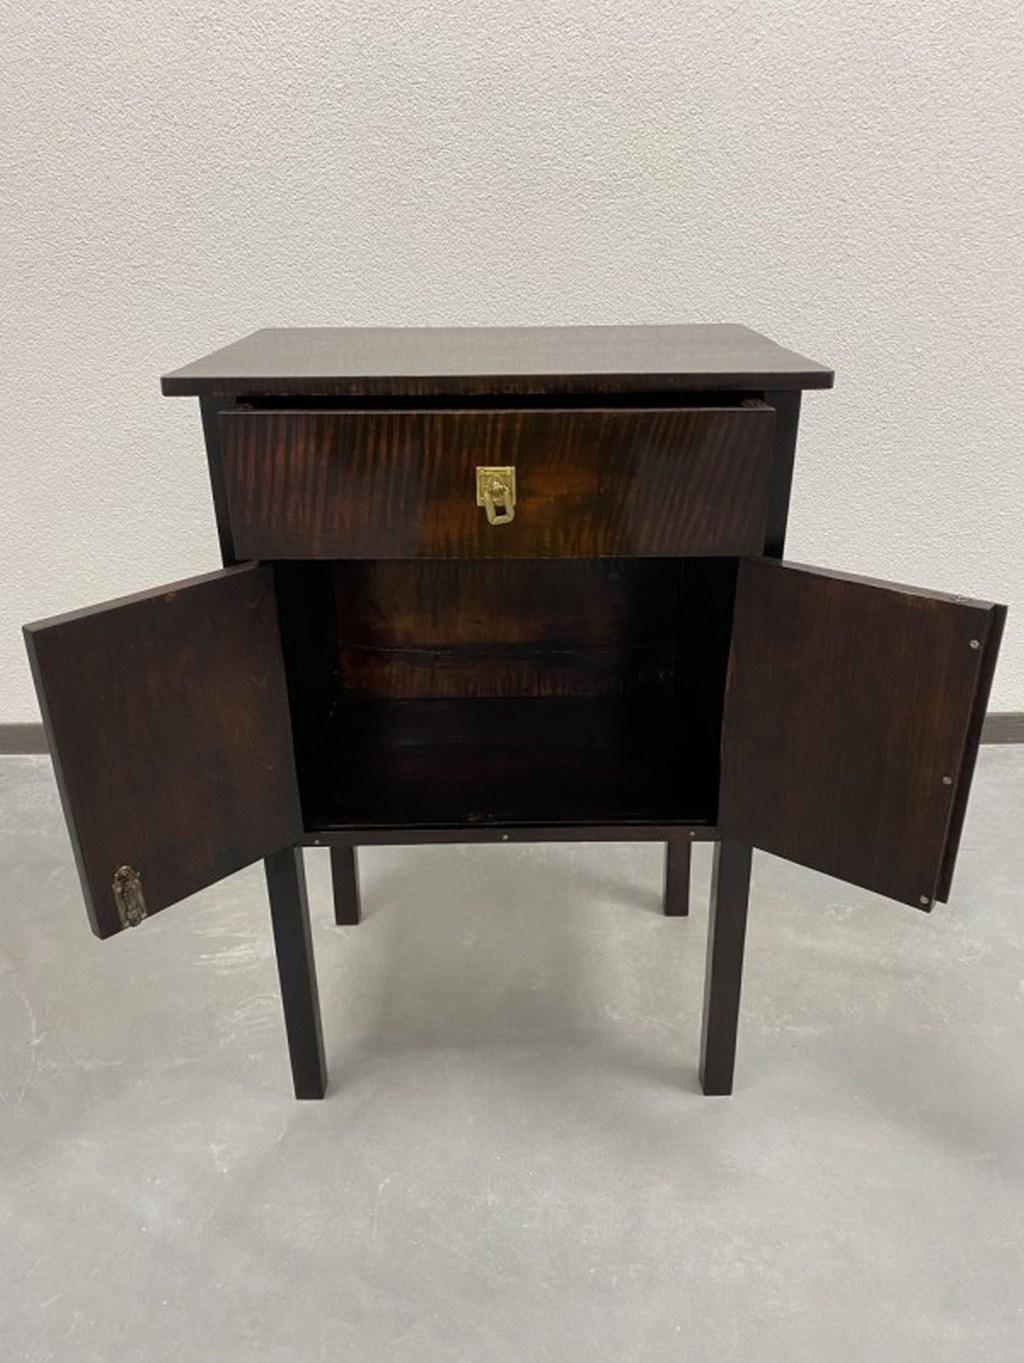 Small secession cabinet with brass fittings. Profesionaly restored and repolished.